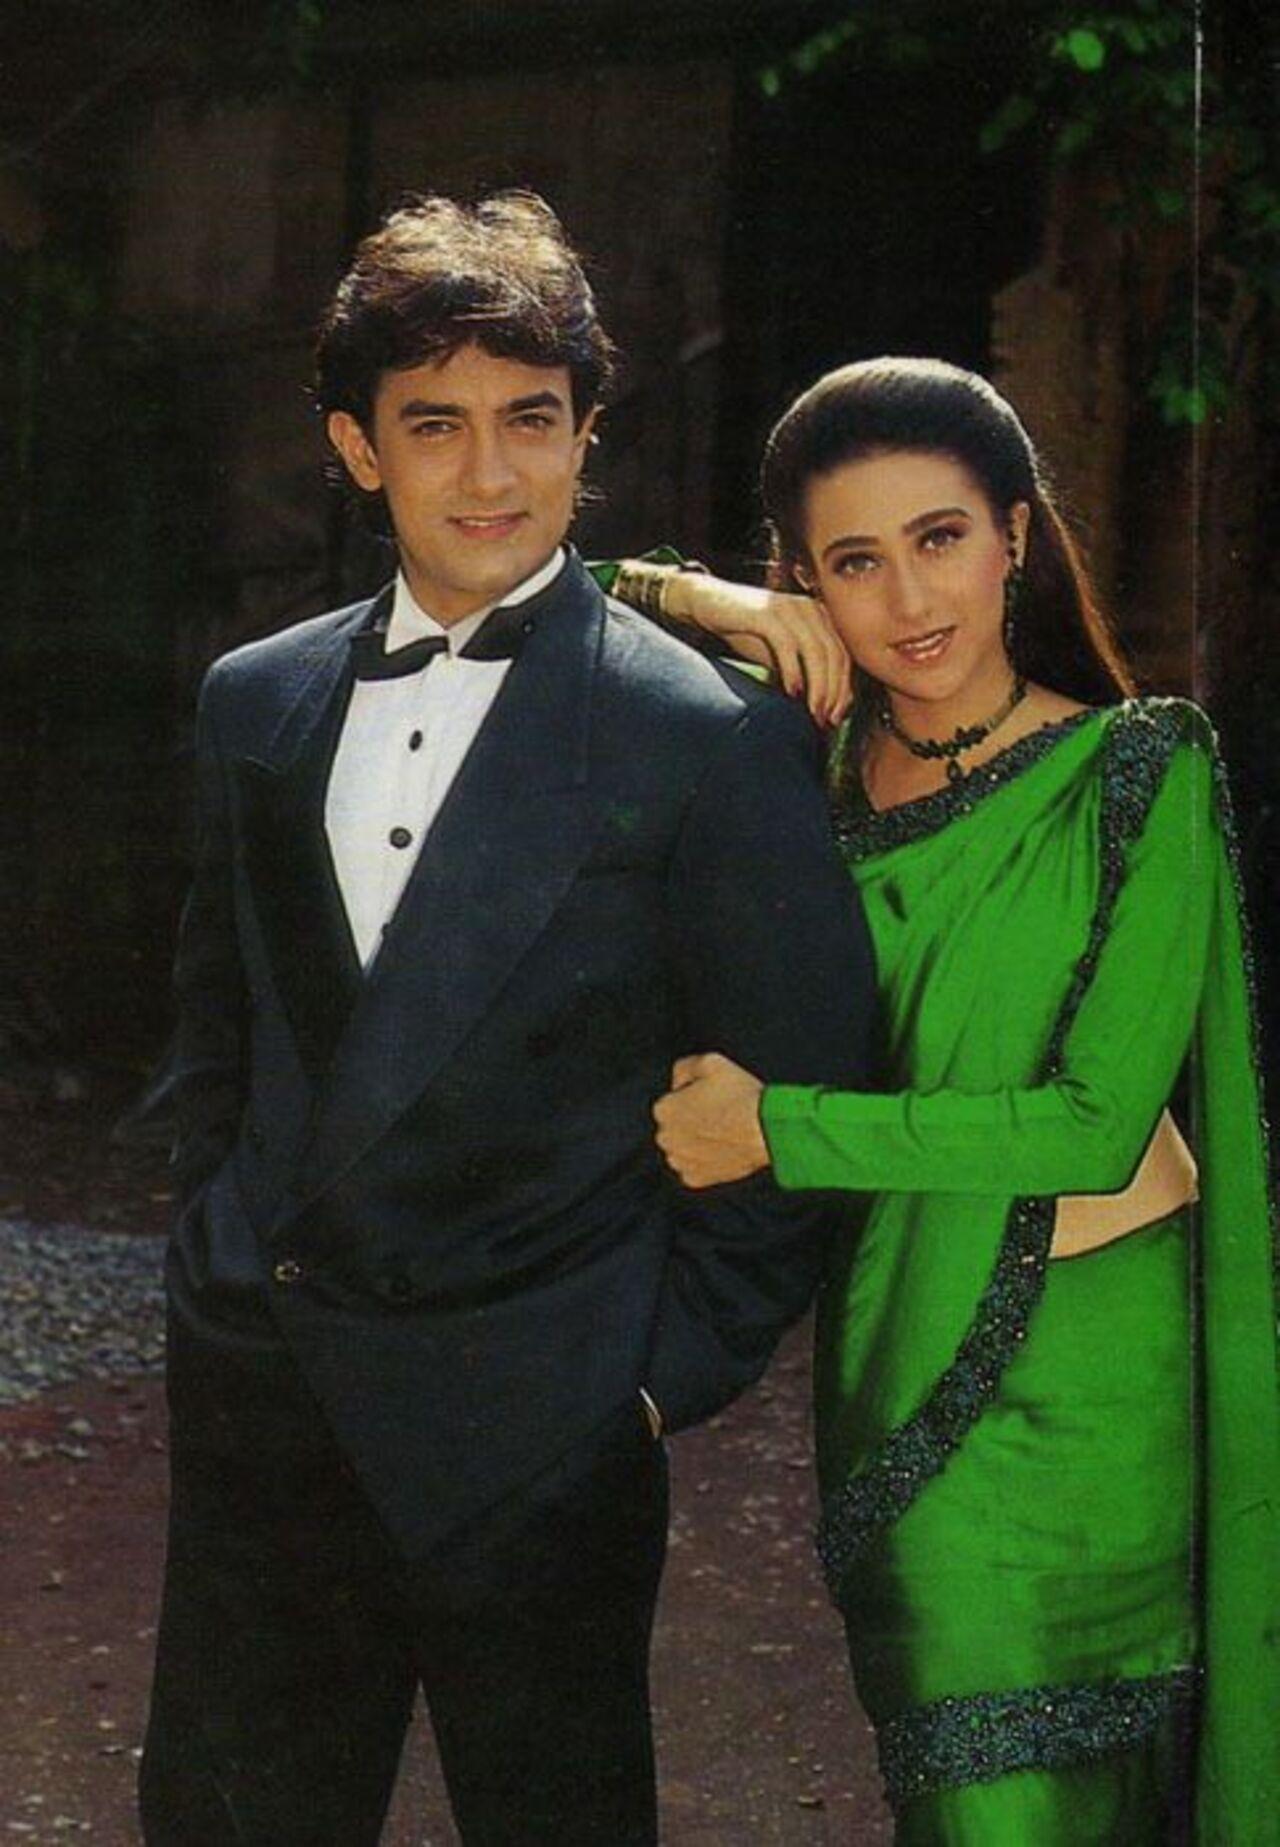 Karisma Kapoor’s poker straight hair
Karisma's look in 'Raja Hindustani', courtesy of the talented Manish Malhotra, was a total hit. Beyond her outfits, it was her sleek, straight brown hair that had everyone's attention. Those stunning locks remain unforgettable, don't they?